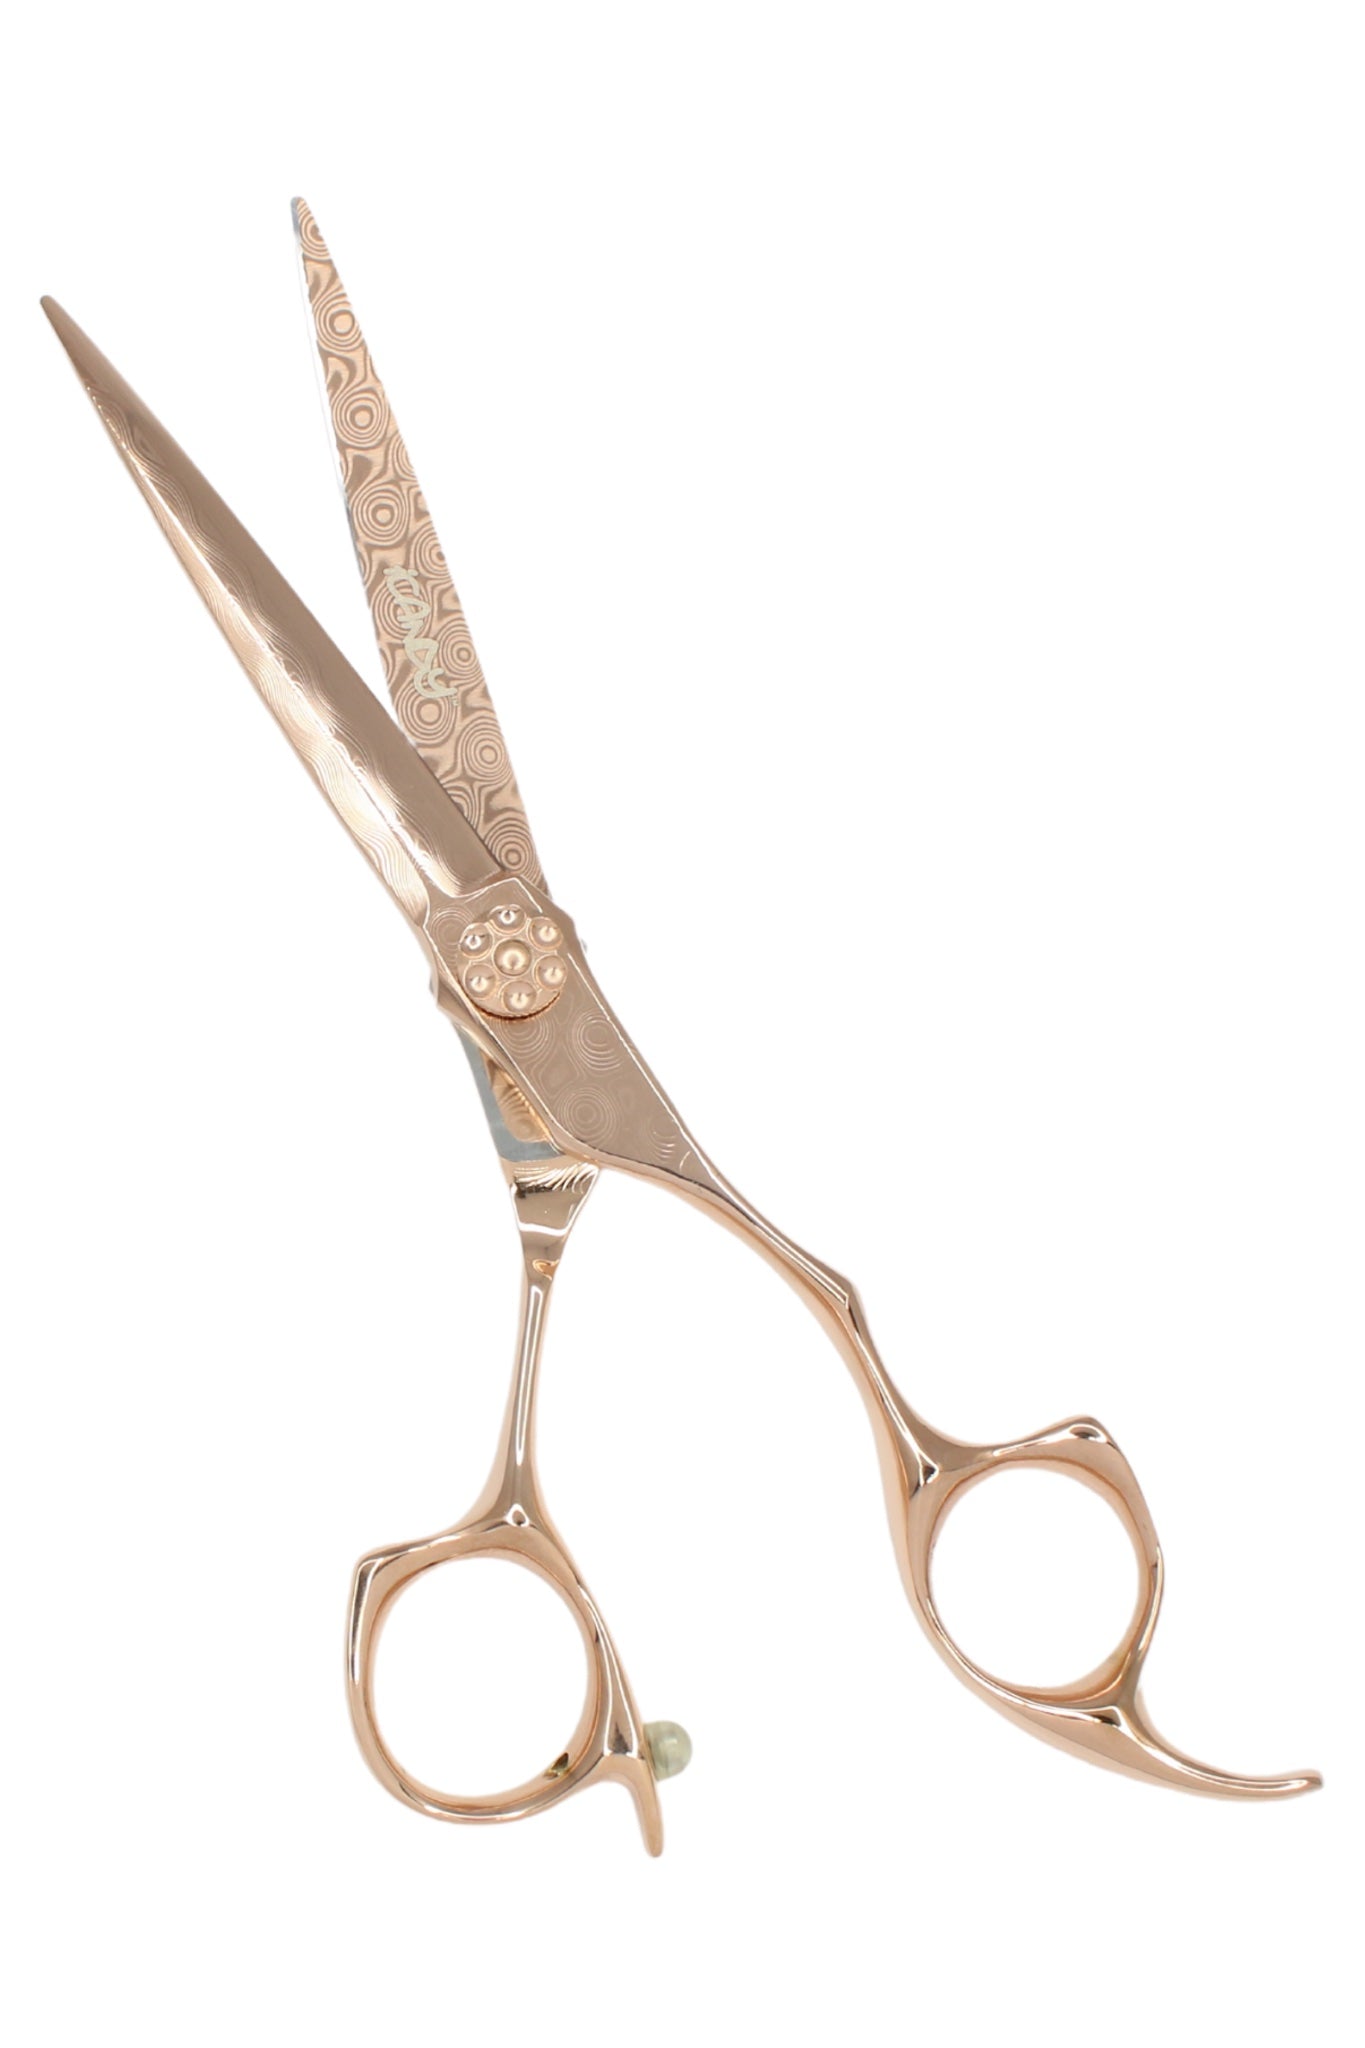 iCandy DAMASCUS ALL STAR Rose Gold Scissor 6.5" Pic2